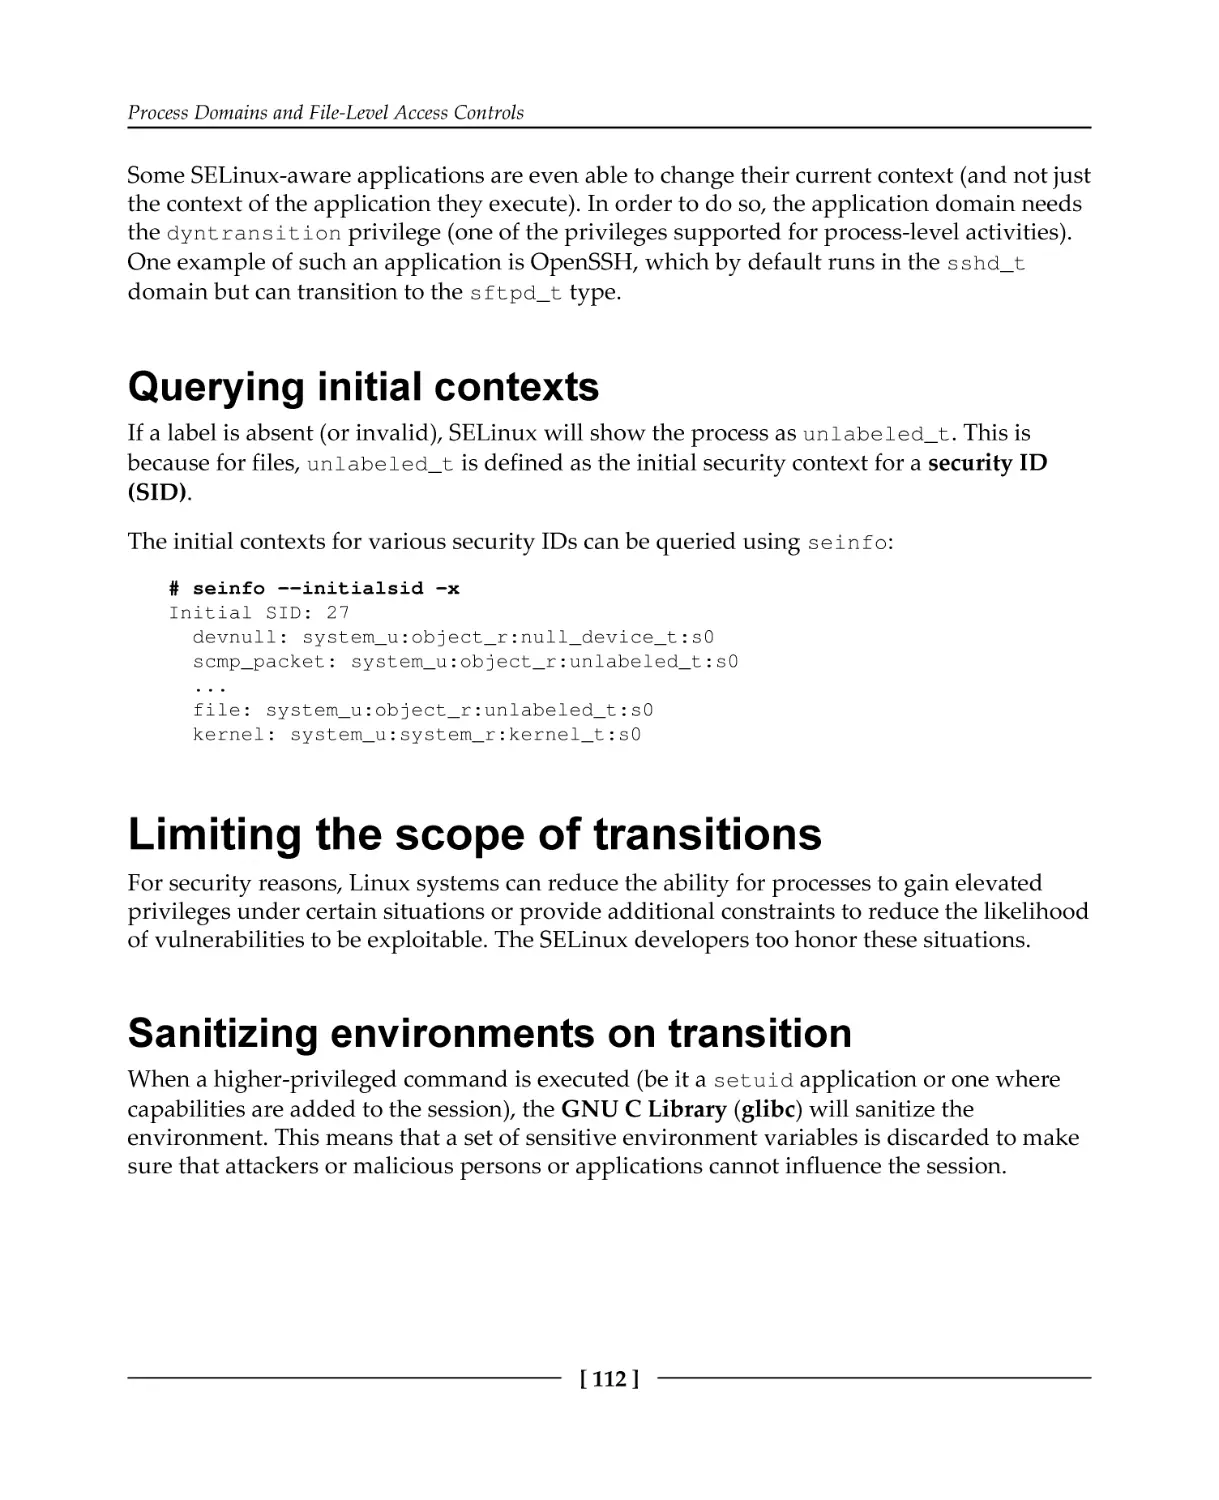 Querying initial contexts
Limiting the scope of transitions
Sanitizing environments on transition